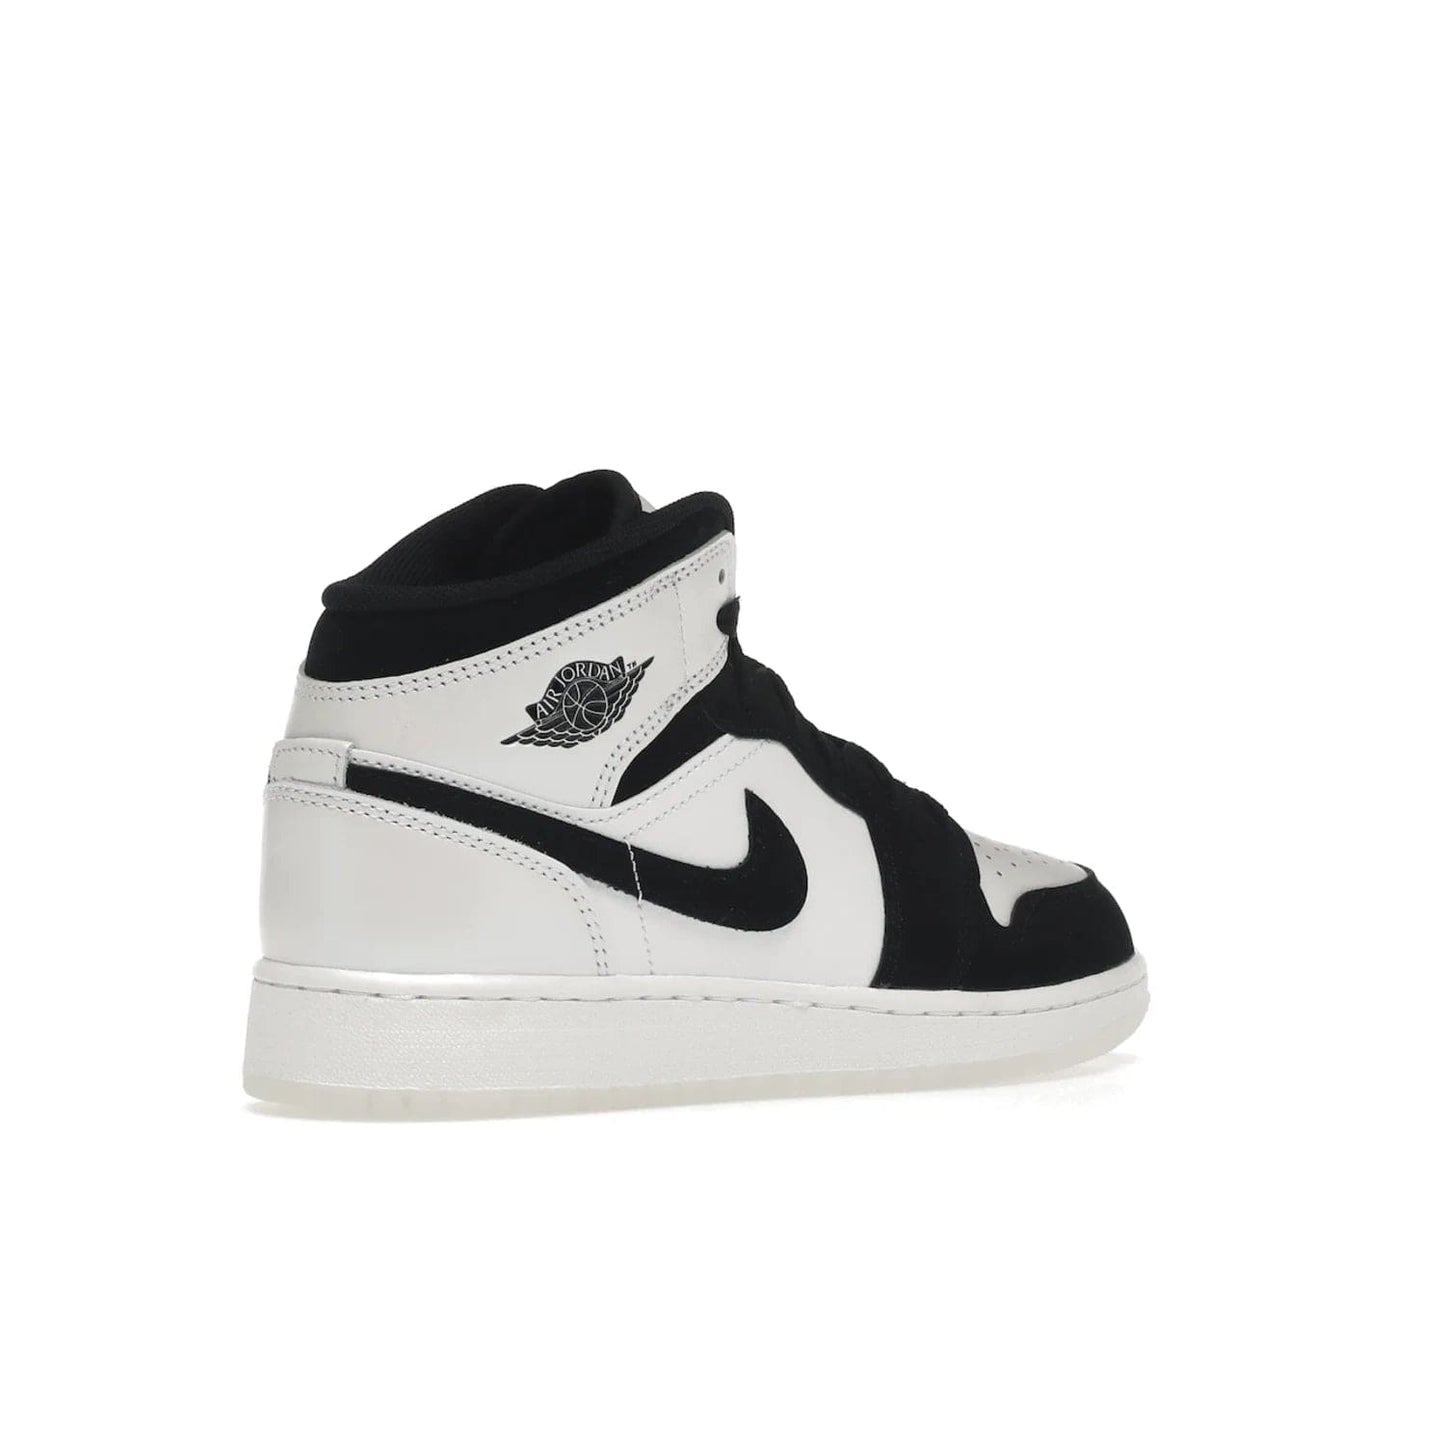 Jordan 1 Mid Diamond Shorts (GS) - Image 33 - Only at www.BallersClubKickz.com - Get the Jordan 1 Mid Diamond Shorts GS on 9th Feb 2022! Features a white, black & suede design with nylon tongue, stamped wings logo, rubber midsole & outsole. Only $100!